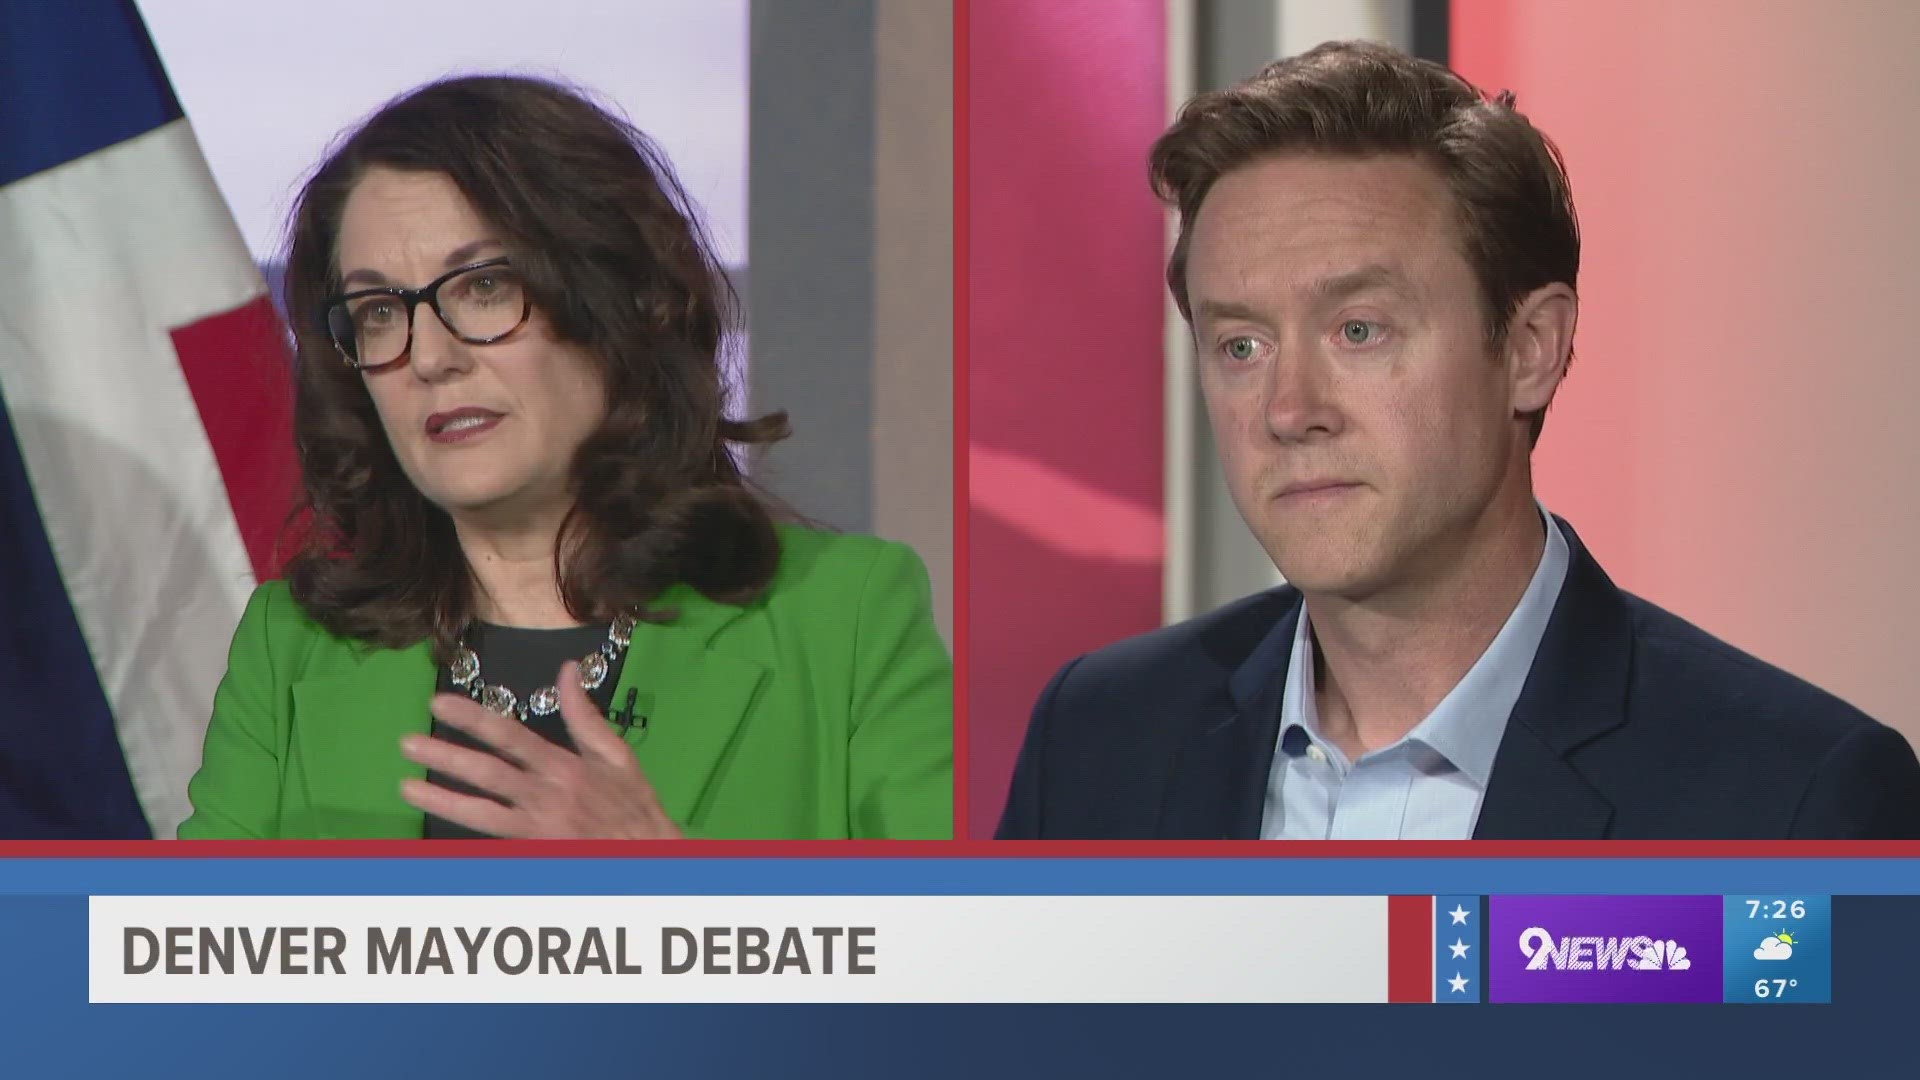 Debate moderator Anusha Roy recaps highlights from 9NEWS' final mayoral debate between Kelly Brough and Mike Johnston ahead of Election Day on June 6.